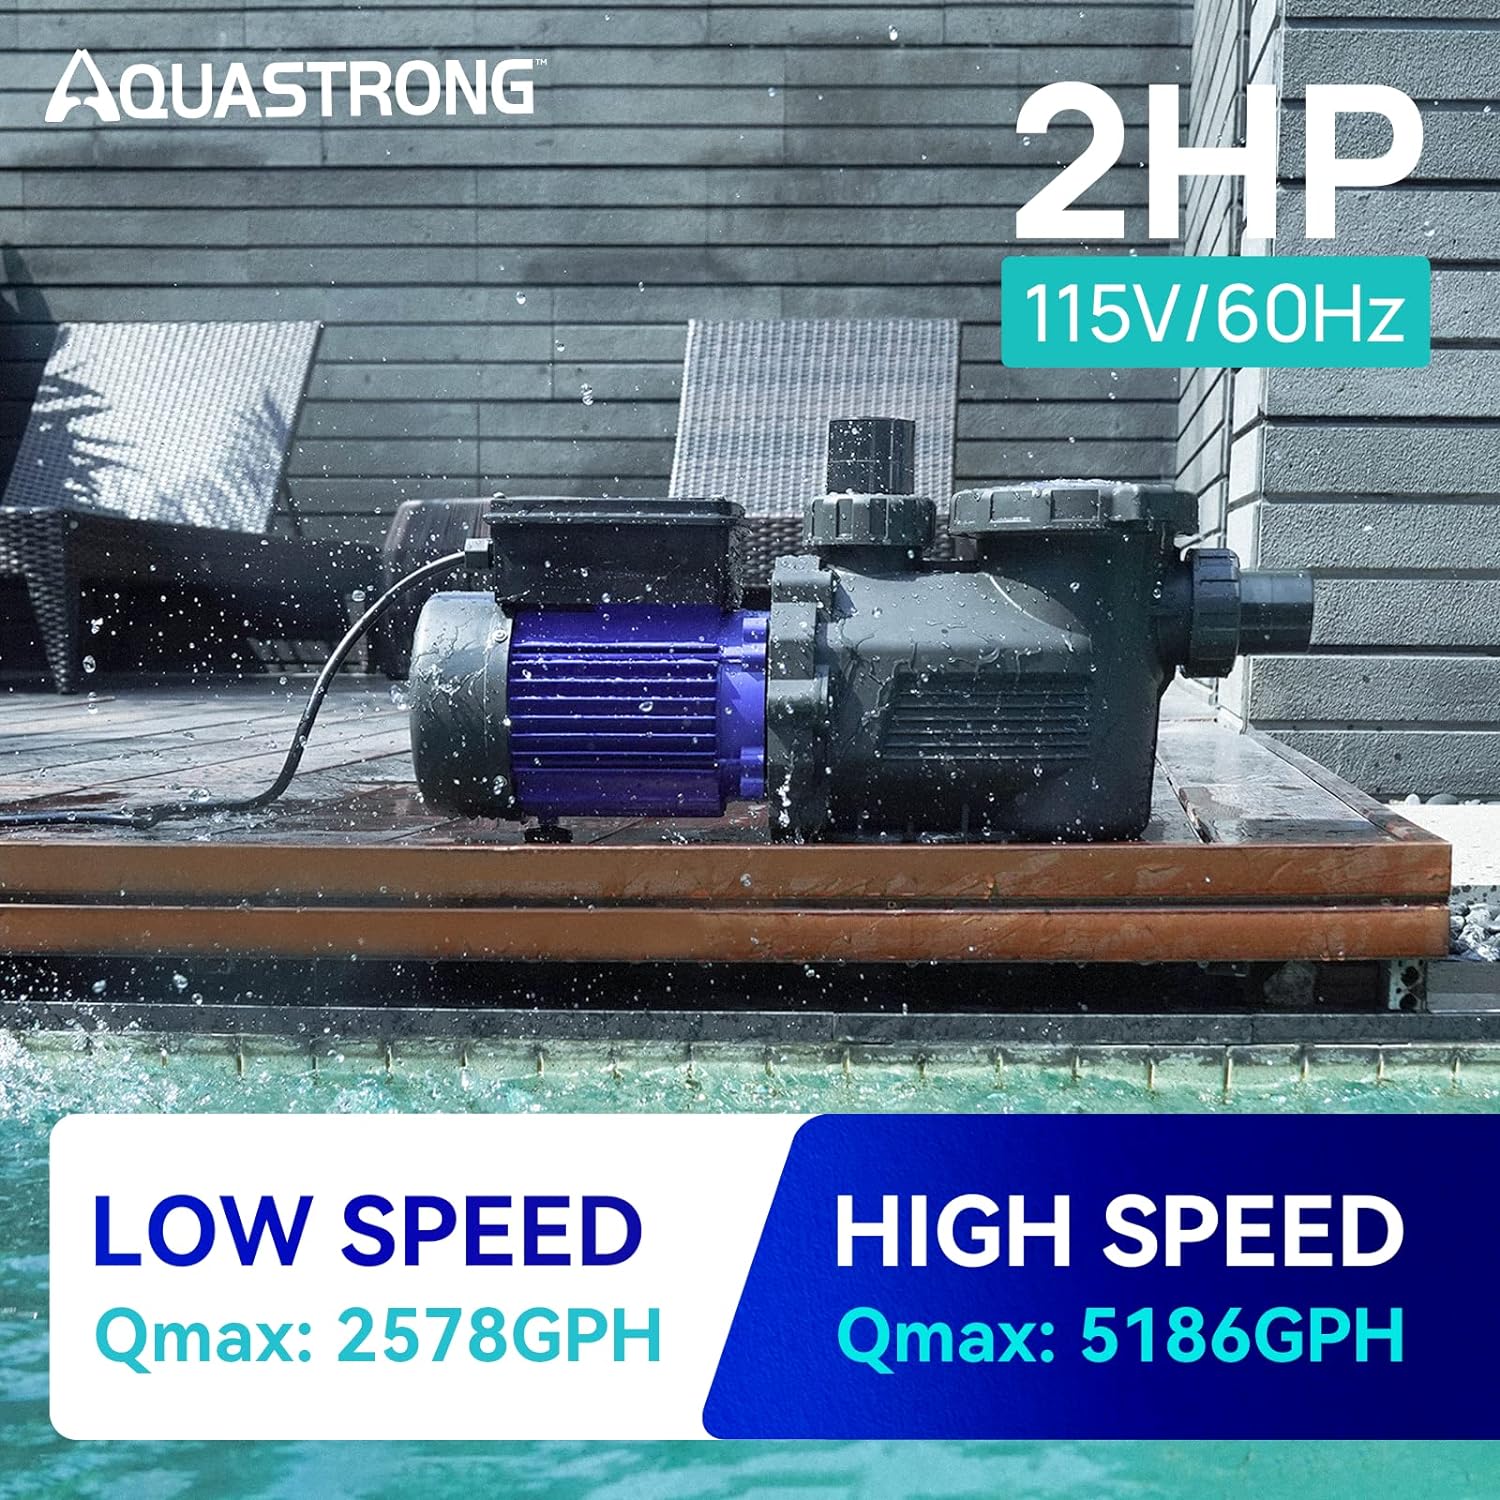 AQUASTRONG 2HP PSP200AD Above Ground Dual Speed Pool Pump, 115V, 5186 GPH - $130